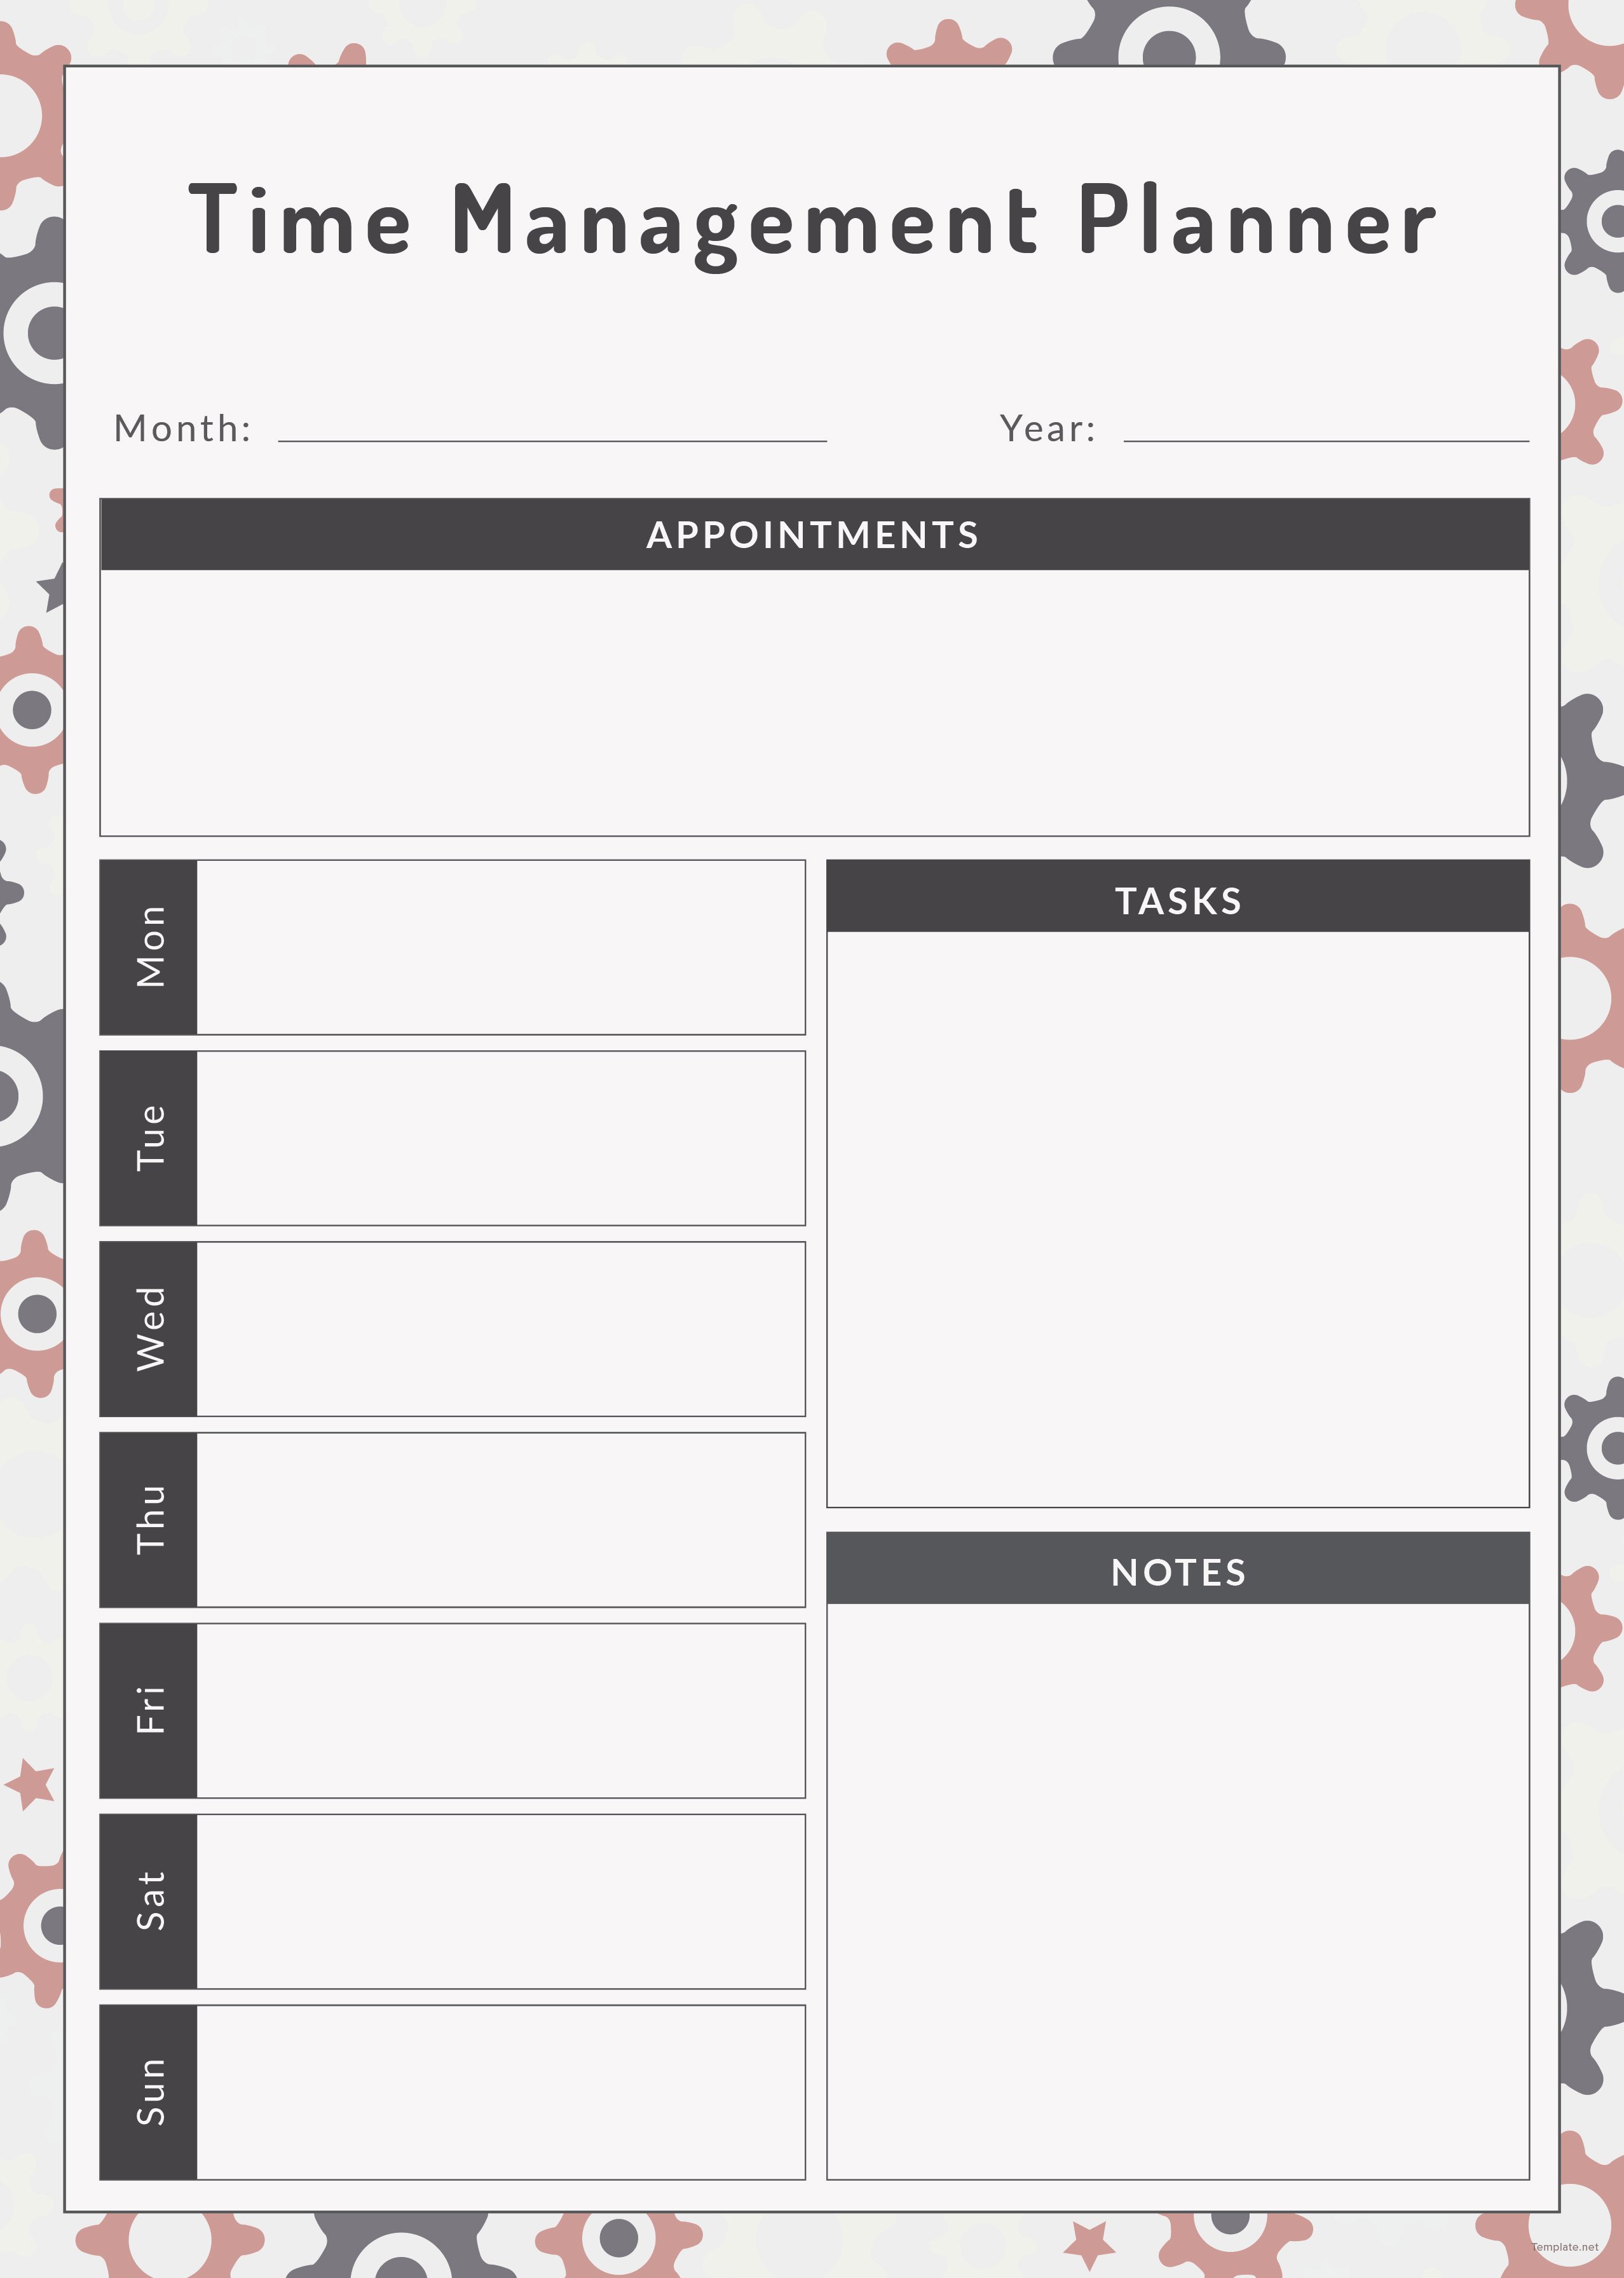 templete for time management report free 4